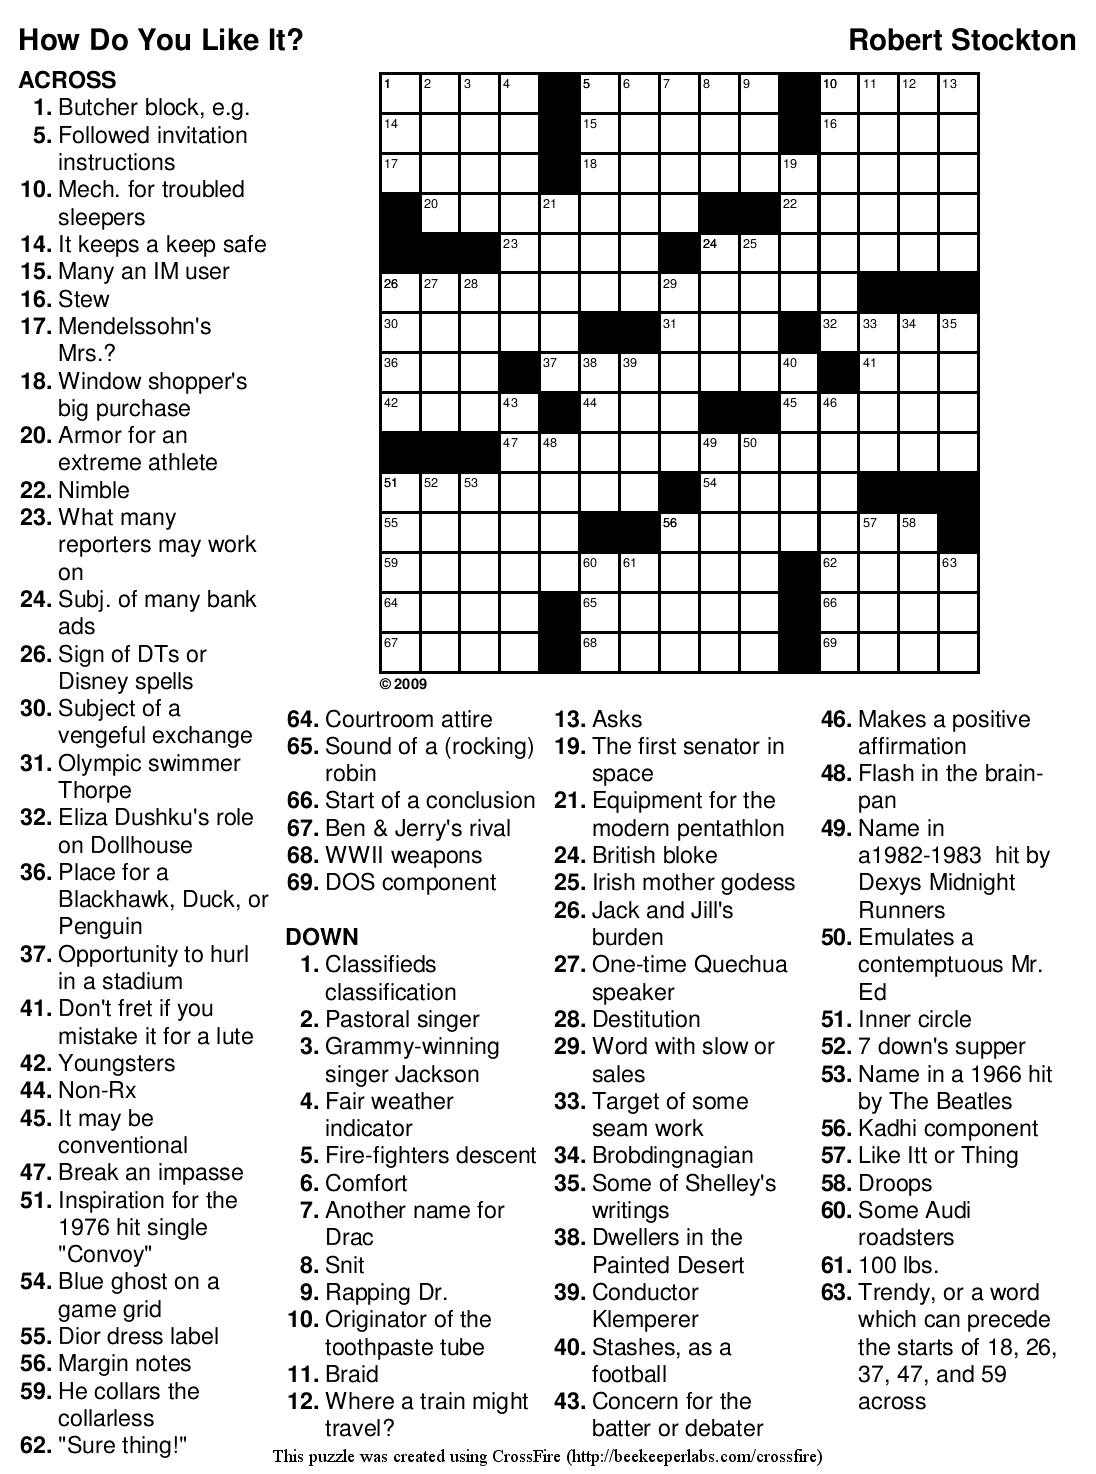 free-themed-crossword-puzzle-96-how-do-you-like-it-beekeeper